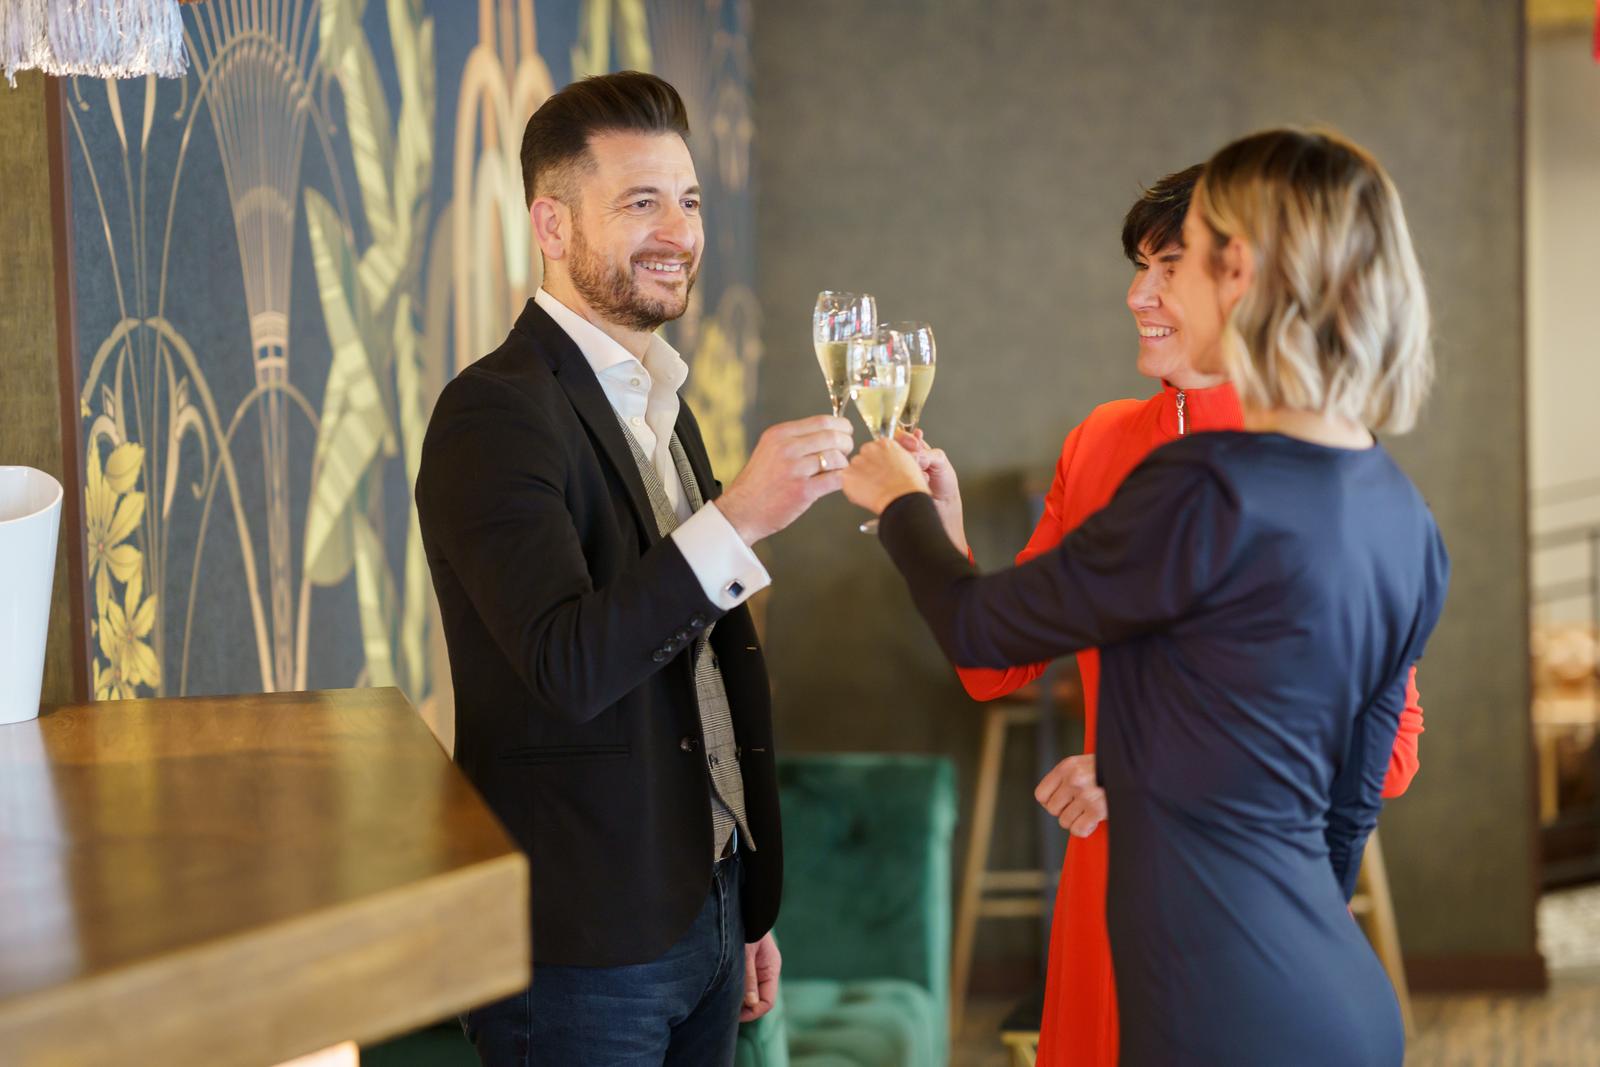 Group of positive well dressed friends clinking glasses with sparkling champagne while celebrating festive event in luxury bar